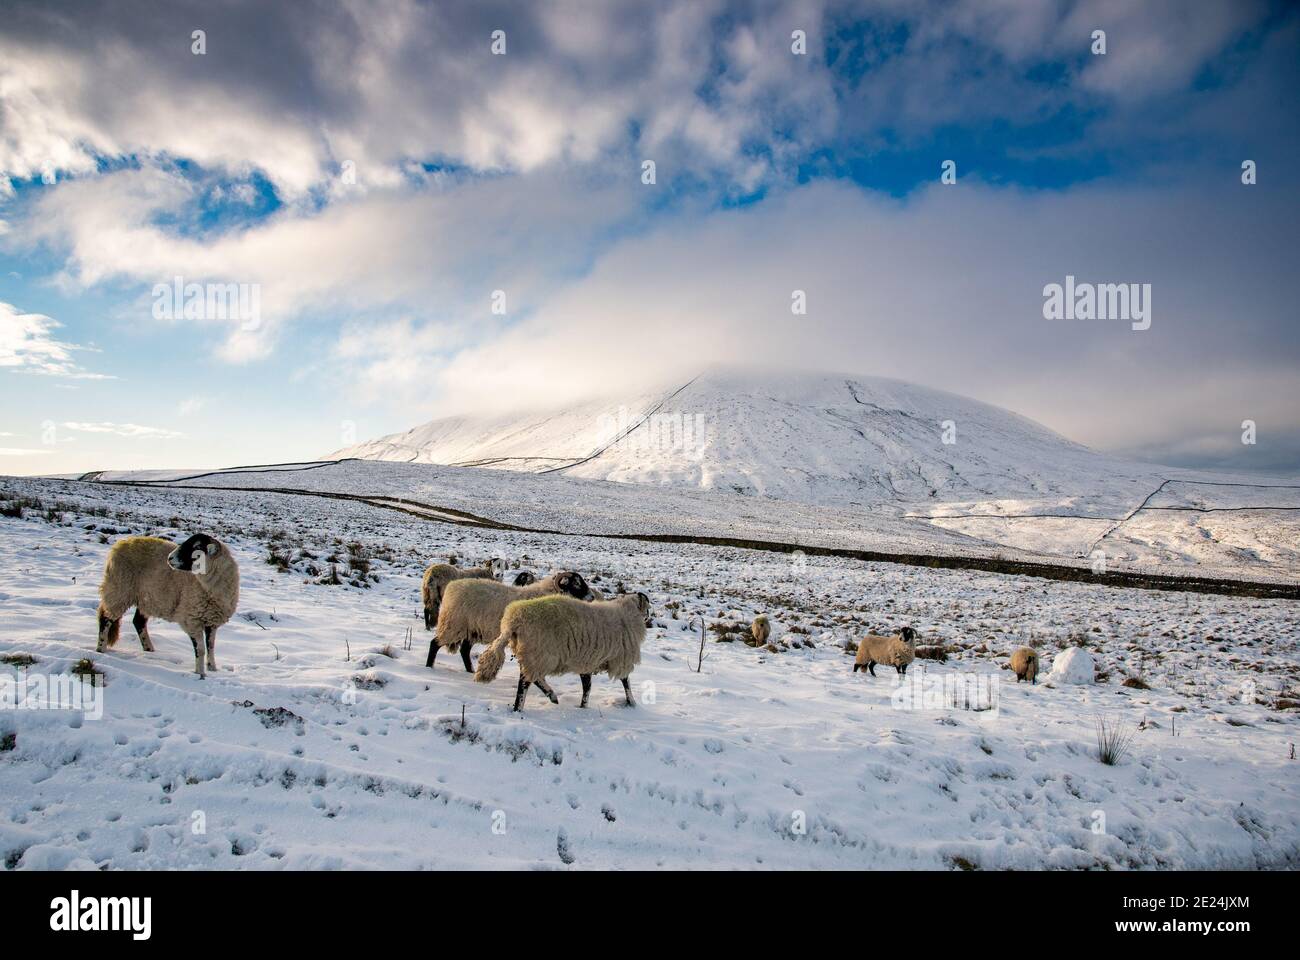 Sheep in the snow near Barley on the side of Pendle Hill, Burnley, Lancashire. Stock Photo